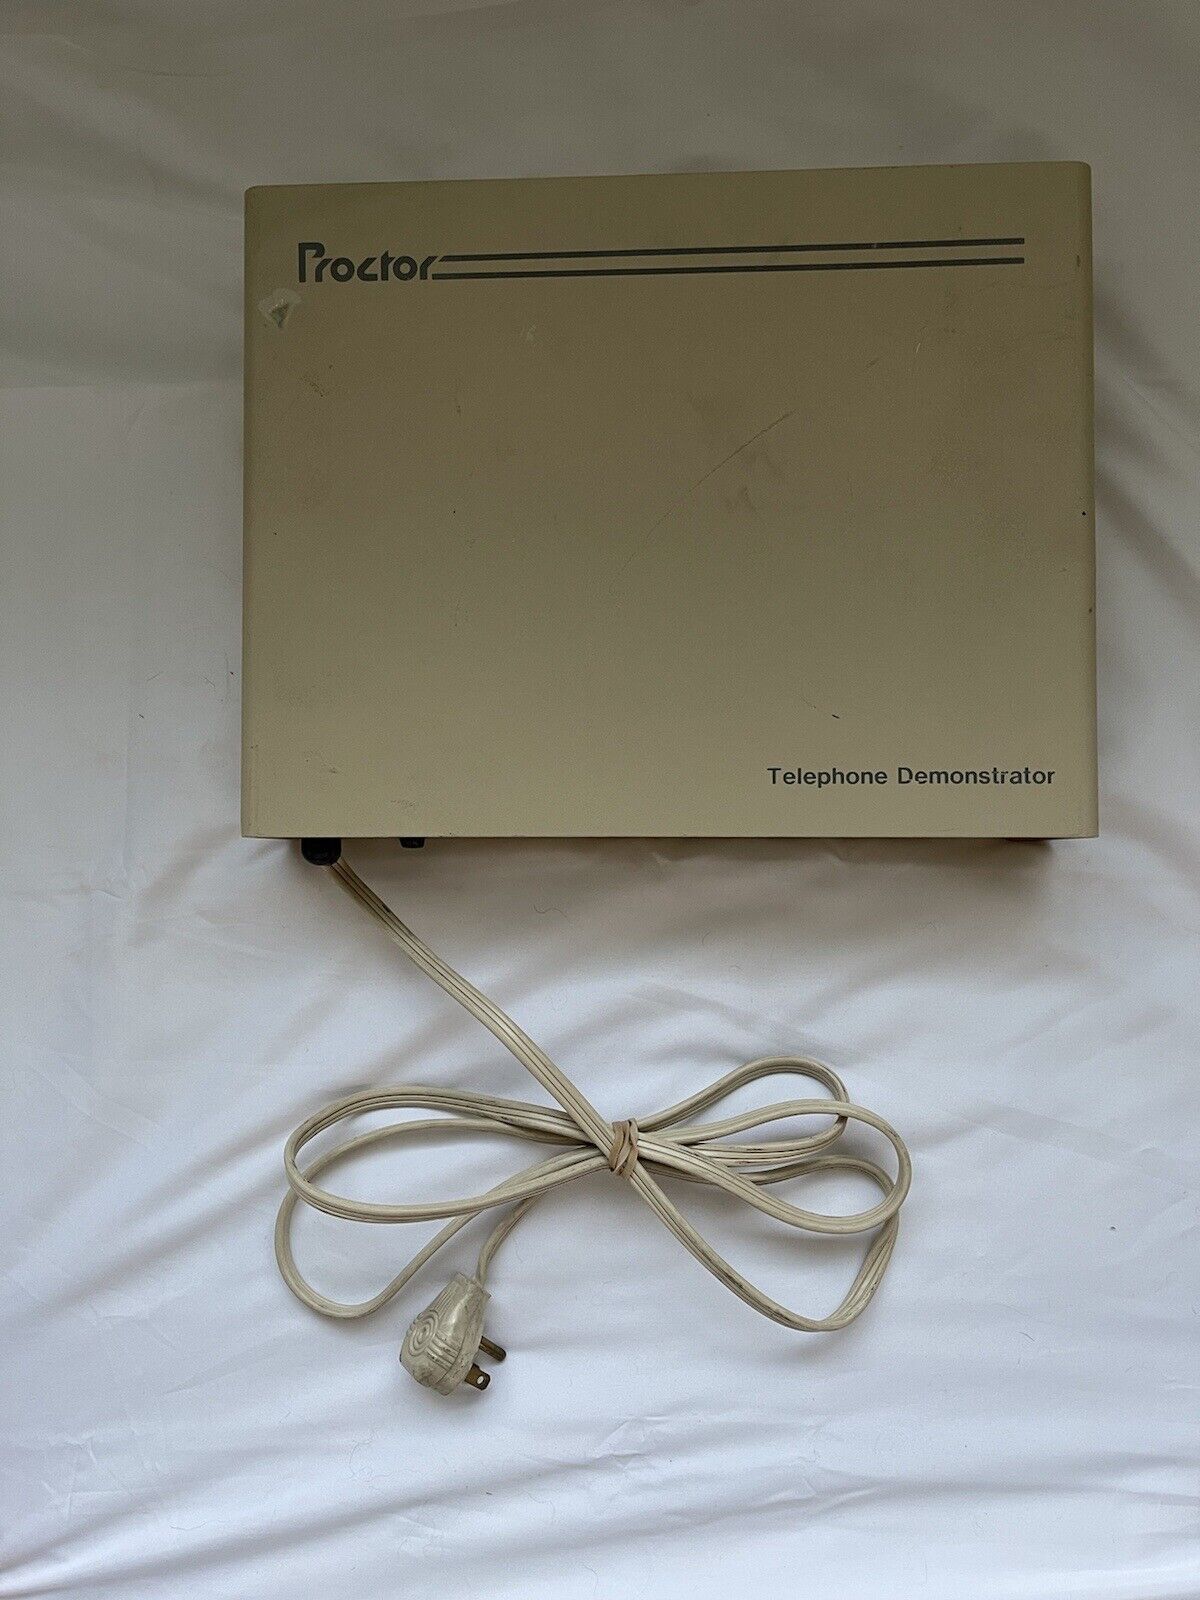 Proctor 49200 Telephone Demonstrator 4 port UNTESTED AS IS